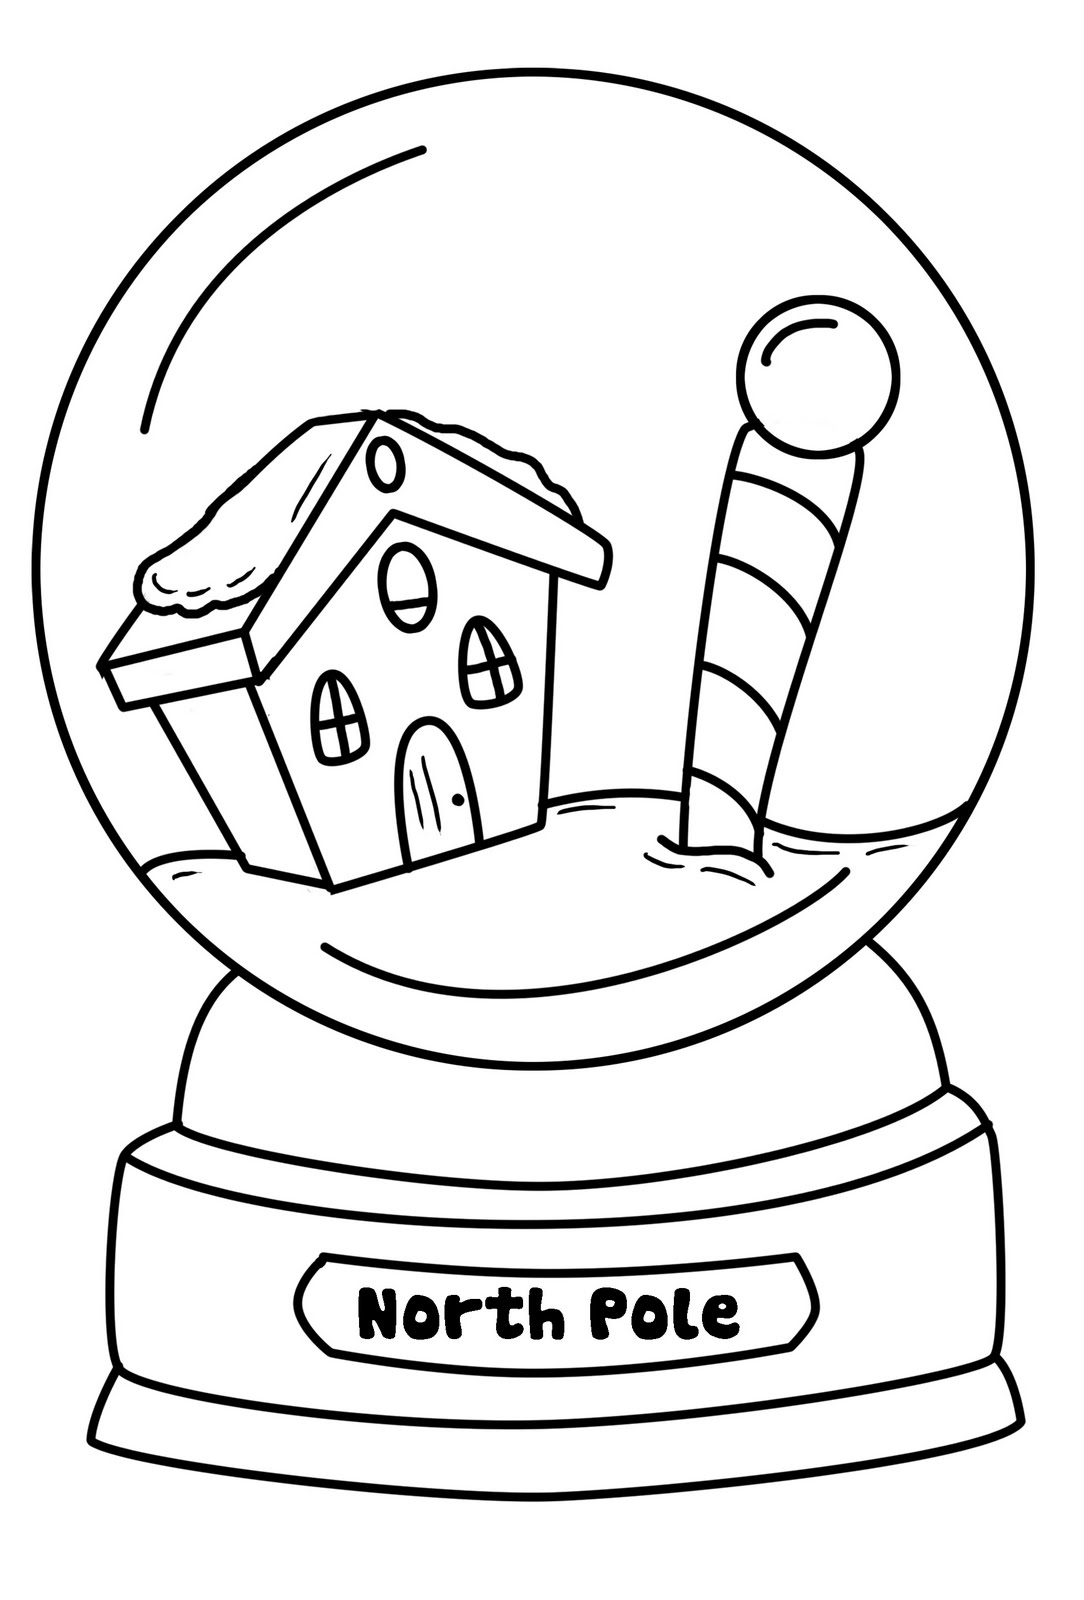 Snowglobe Coloring Pages Best Coloring Pages For Kids